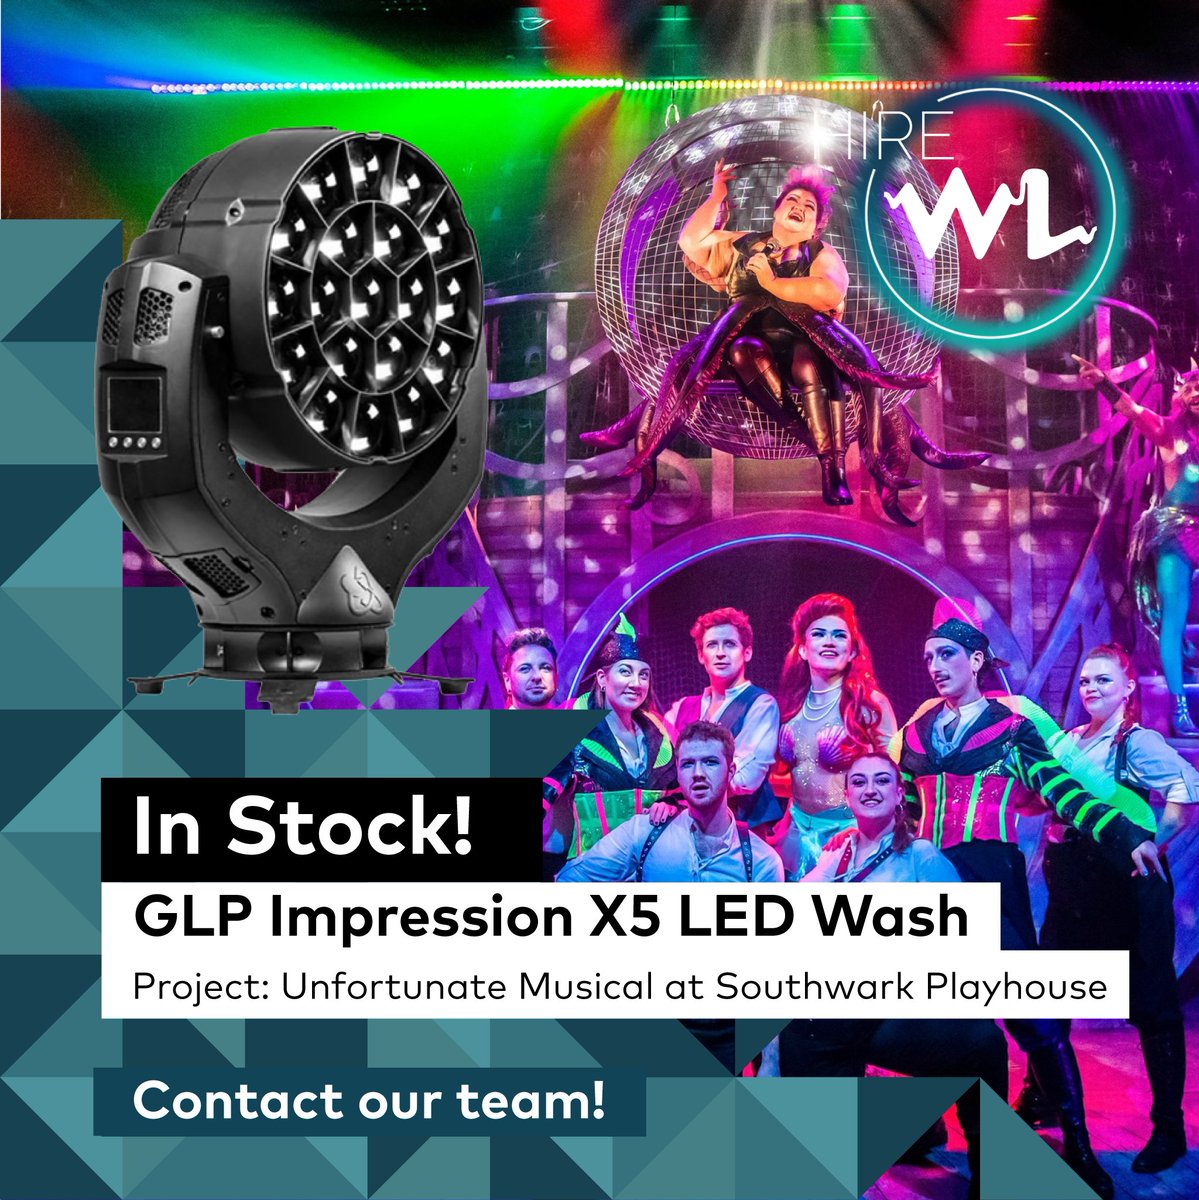 Available for Hire - @GLPimpression X5 LED Wash The GLP Impression X5 features 19 powerful and exclusive 40 Watt LEDs, providing enormous power and allowing the fixture to penetrate even the most difficult lighting environments. To hire, please visit: hubs.la/Q02tbj5S0